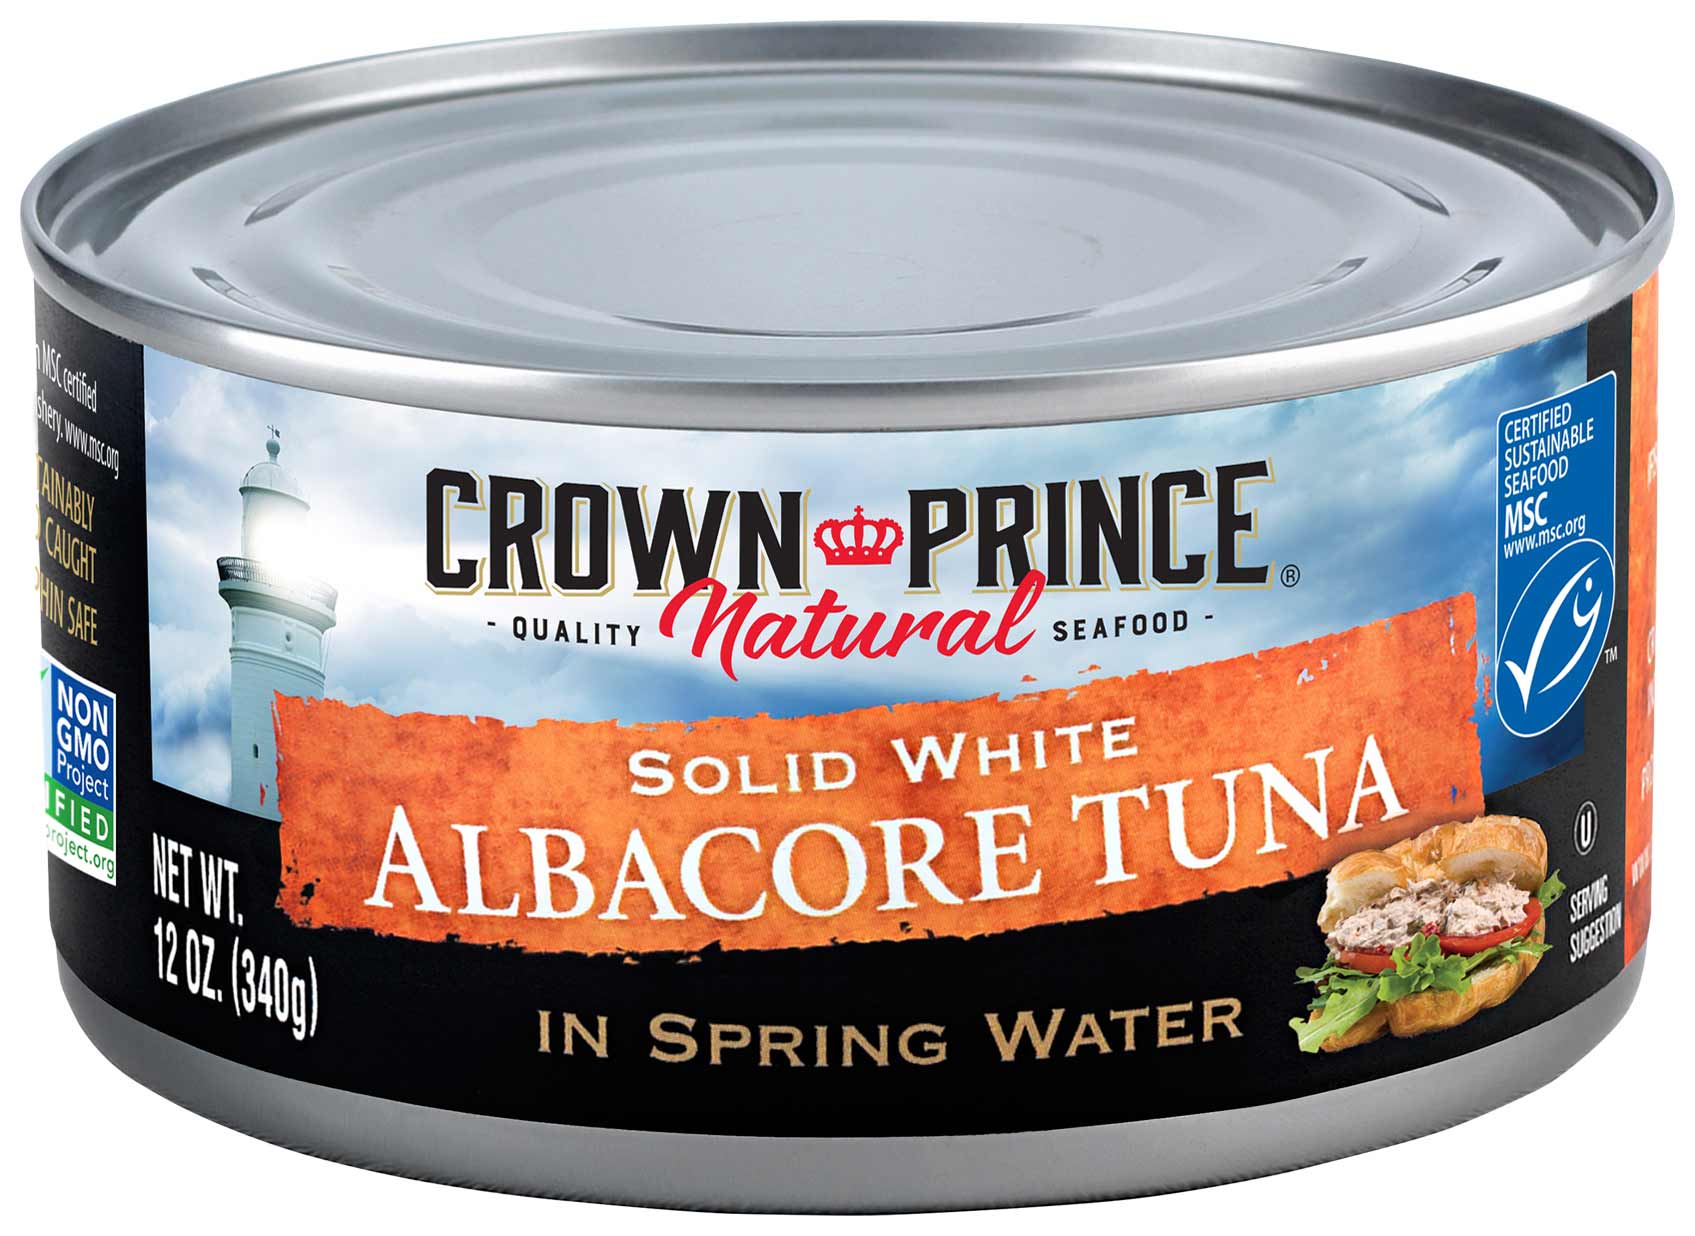 Crown Prince Natural Solid White Albacore Tuna in Spring Water